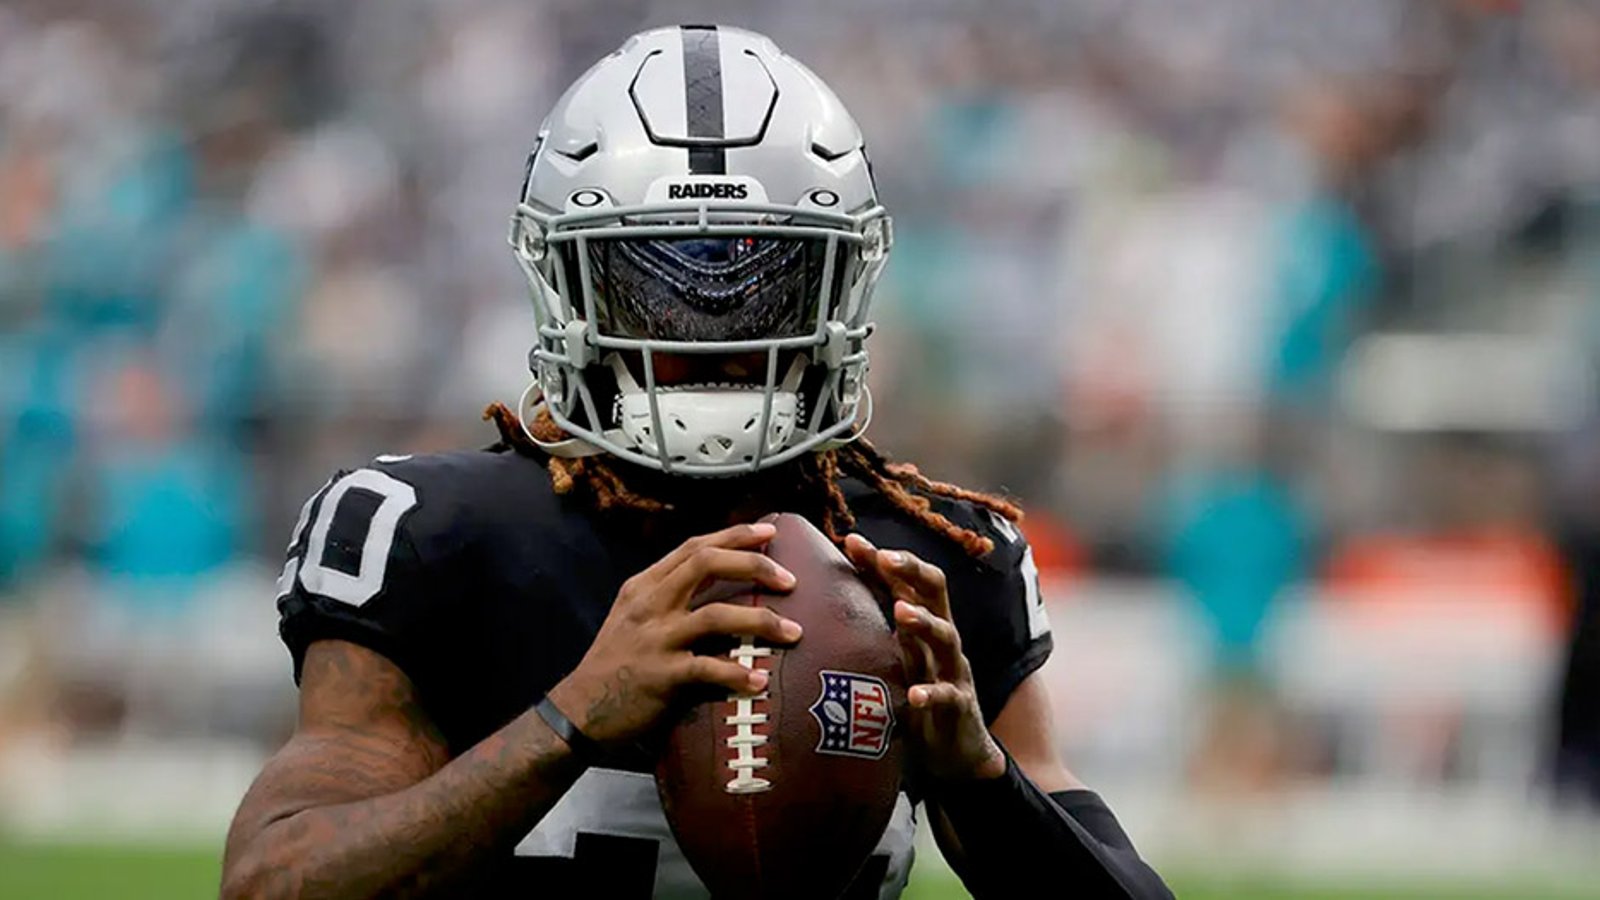 Yet ANOTHER Raiders player released to due off-field indiscretion 